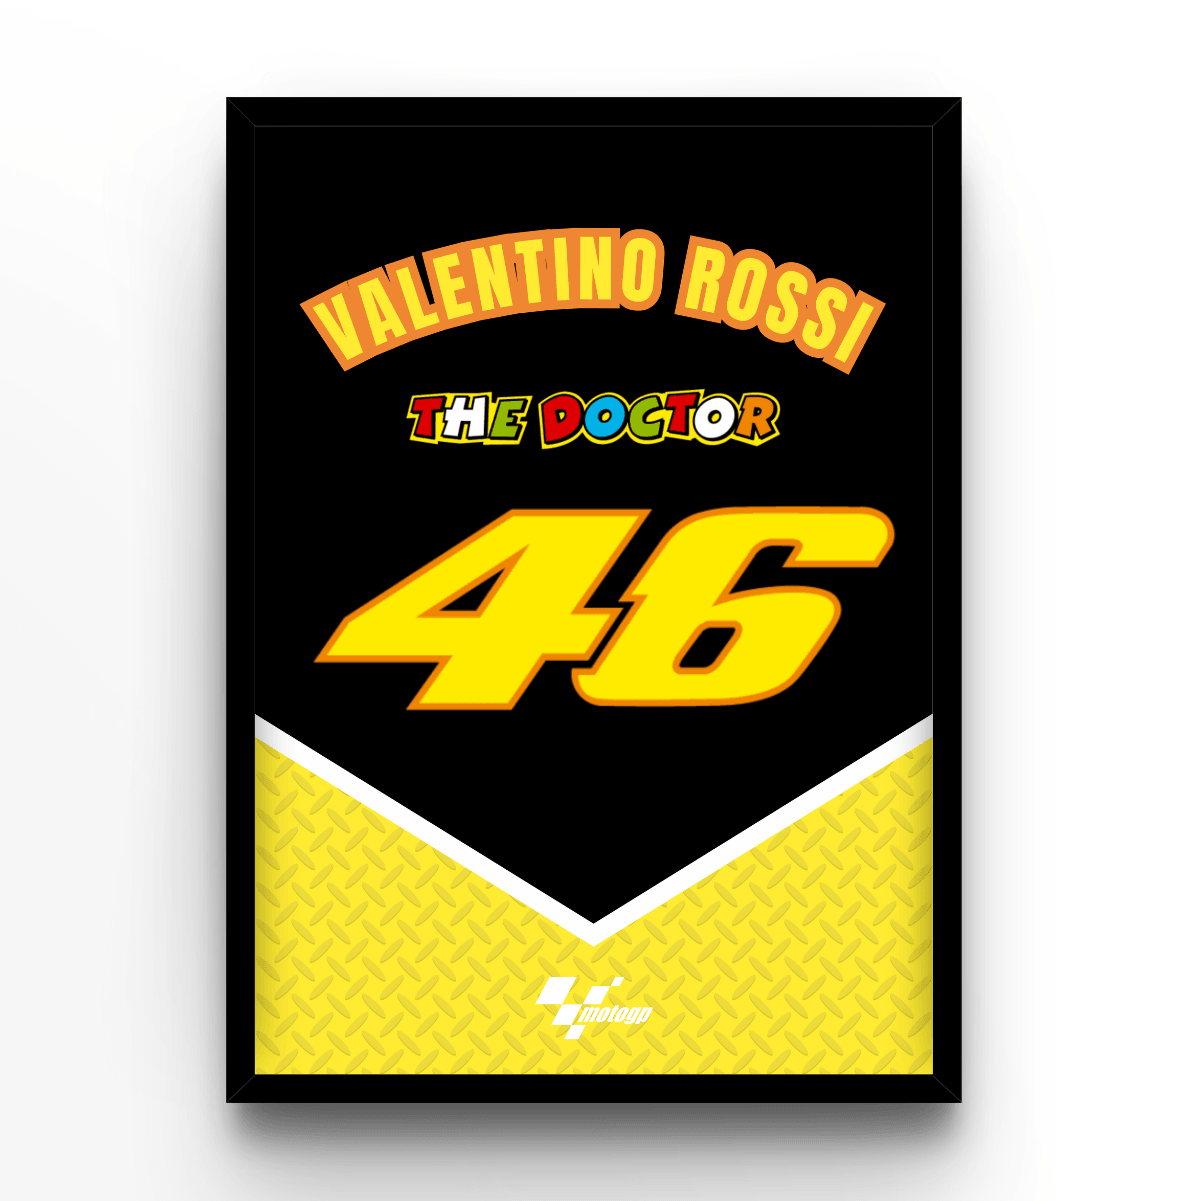 Valentino Rossi - A4, A3, A2 Posters Base - Poster Print Shop / Art Prints / PostersBase